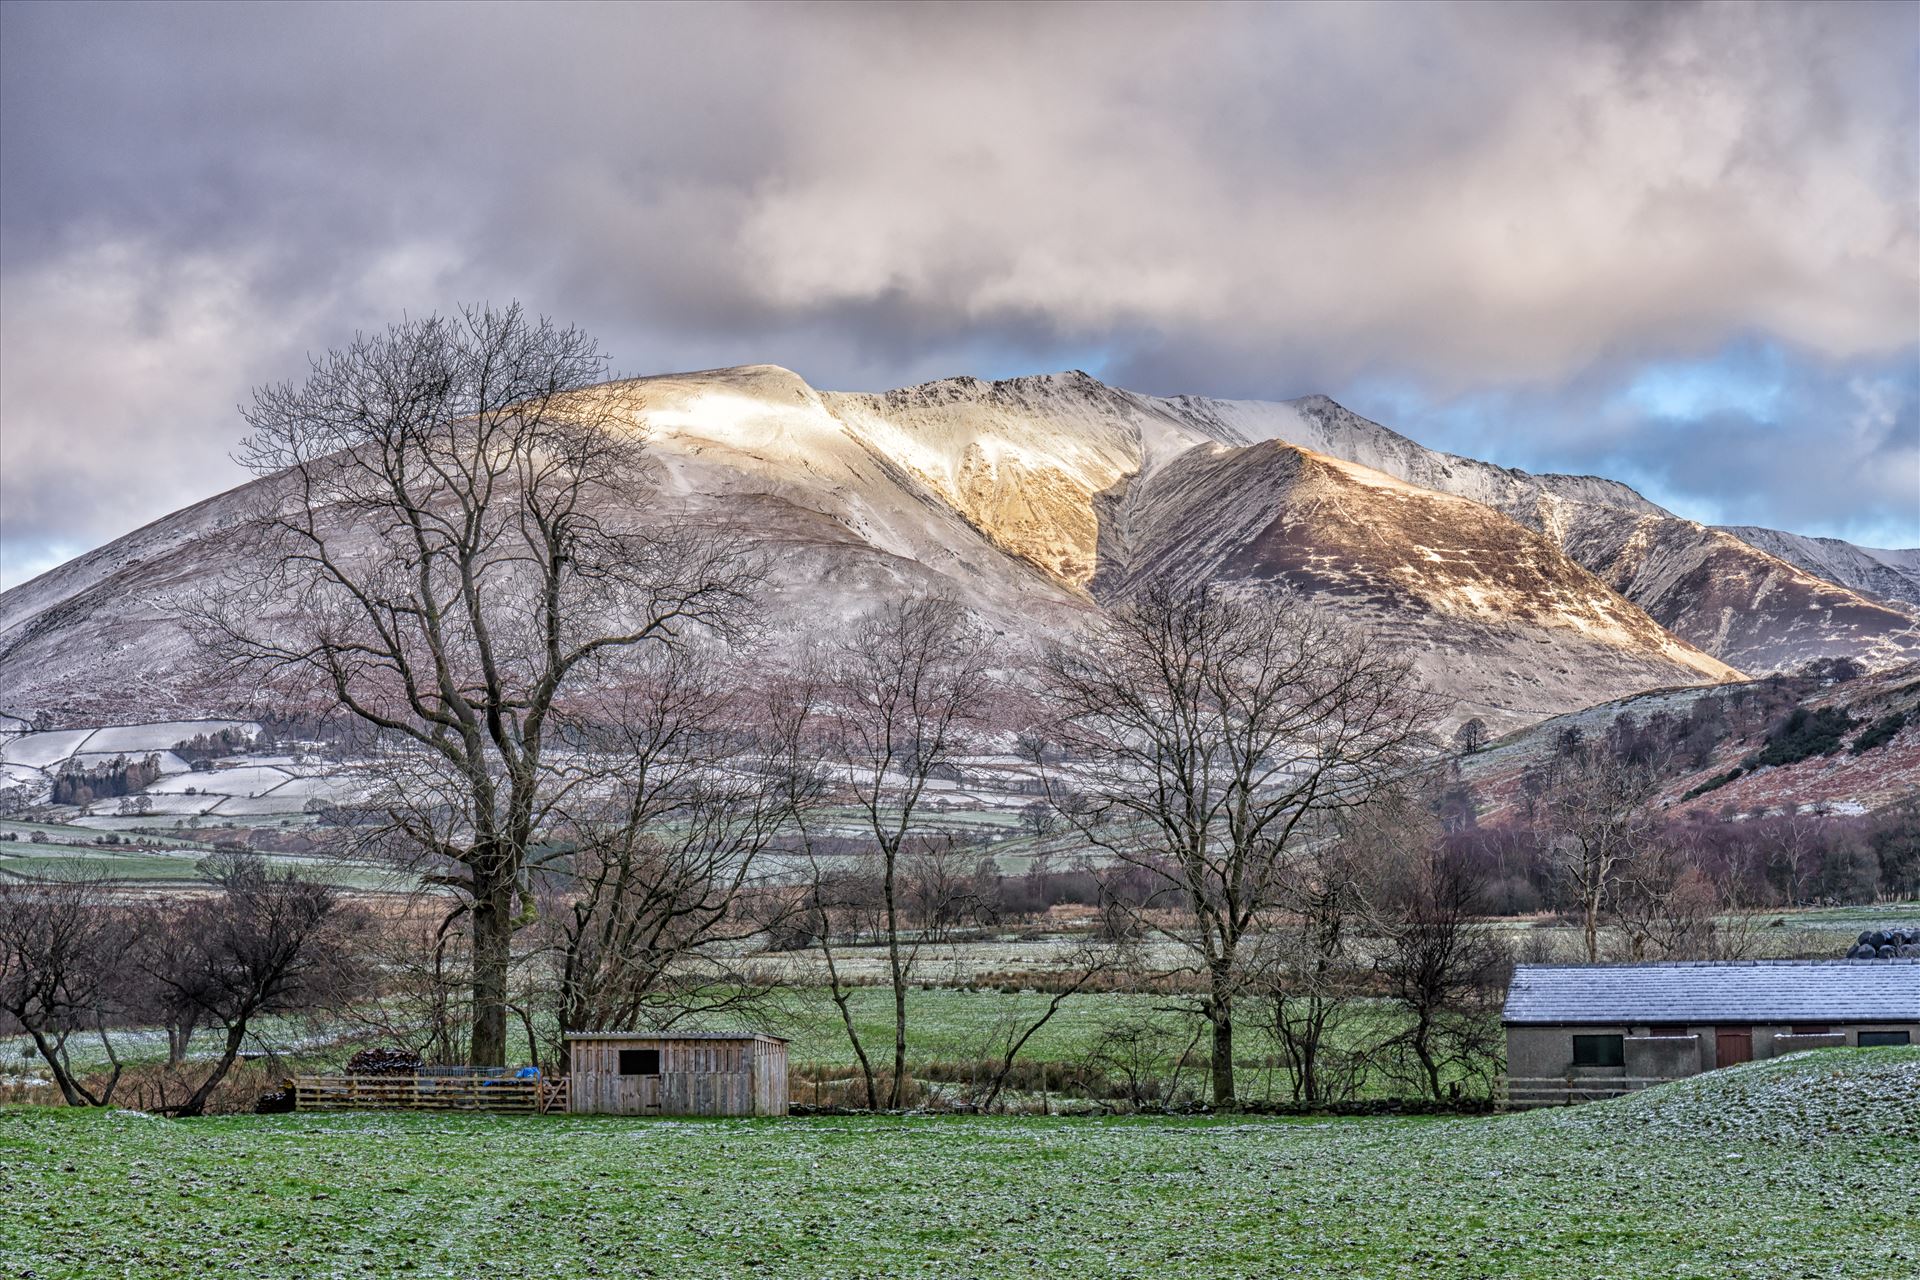 Snowy mountains - A snowy landscape shot taken in the Lake District. by philreay